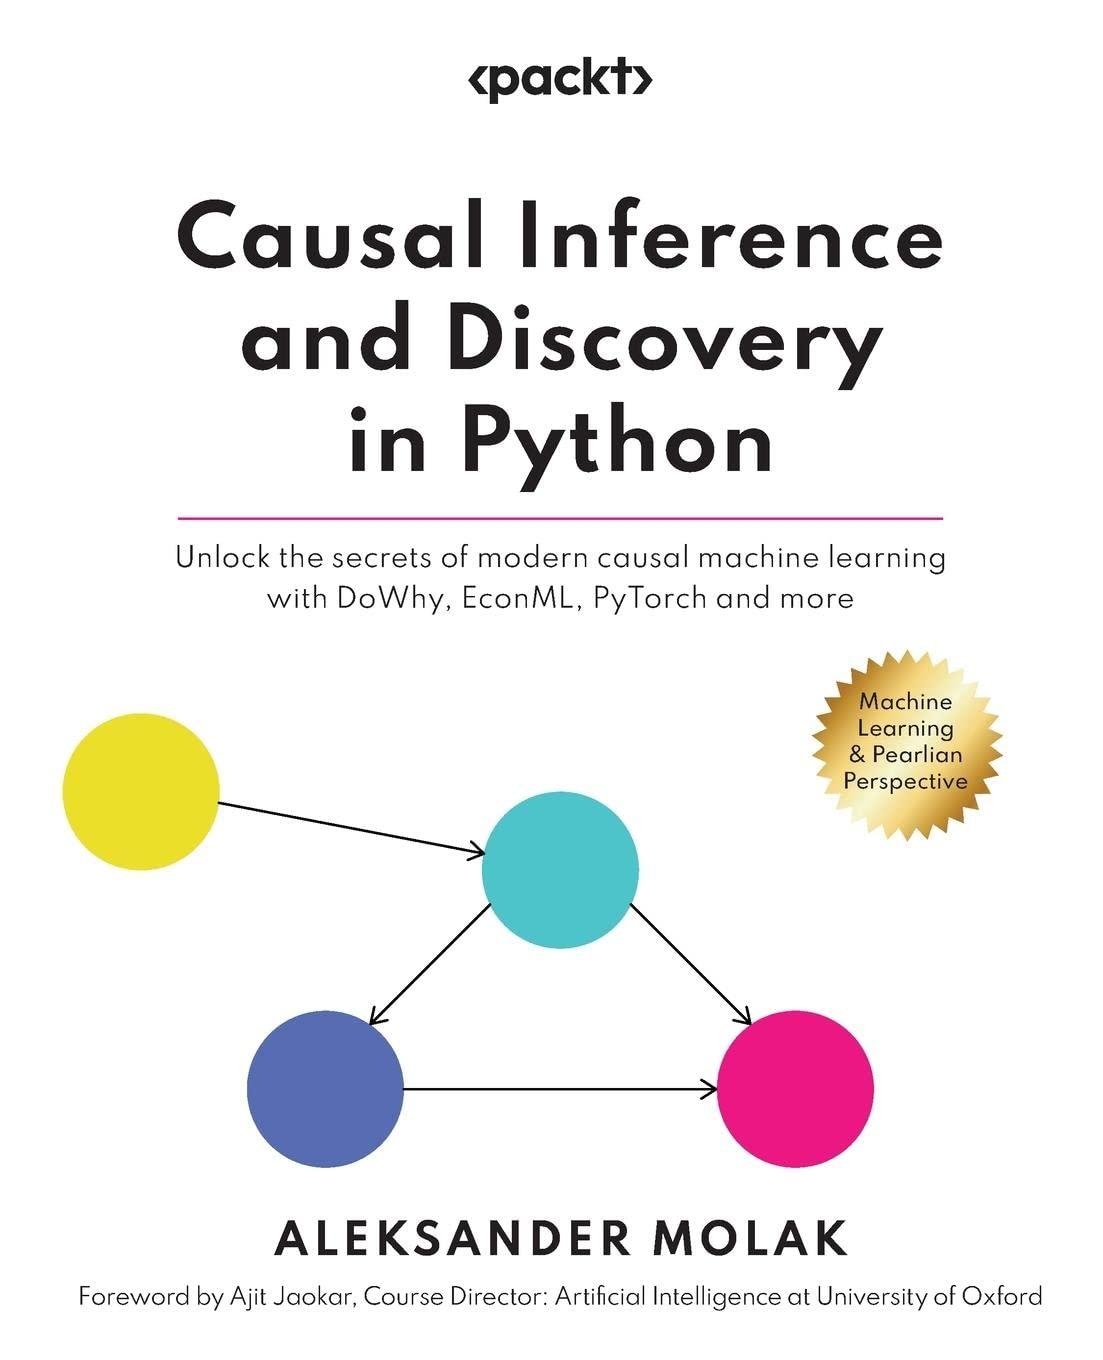 causal inference and discovery in python unlock the secrets of modern causal machine learning with dowhy